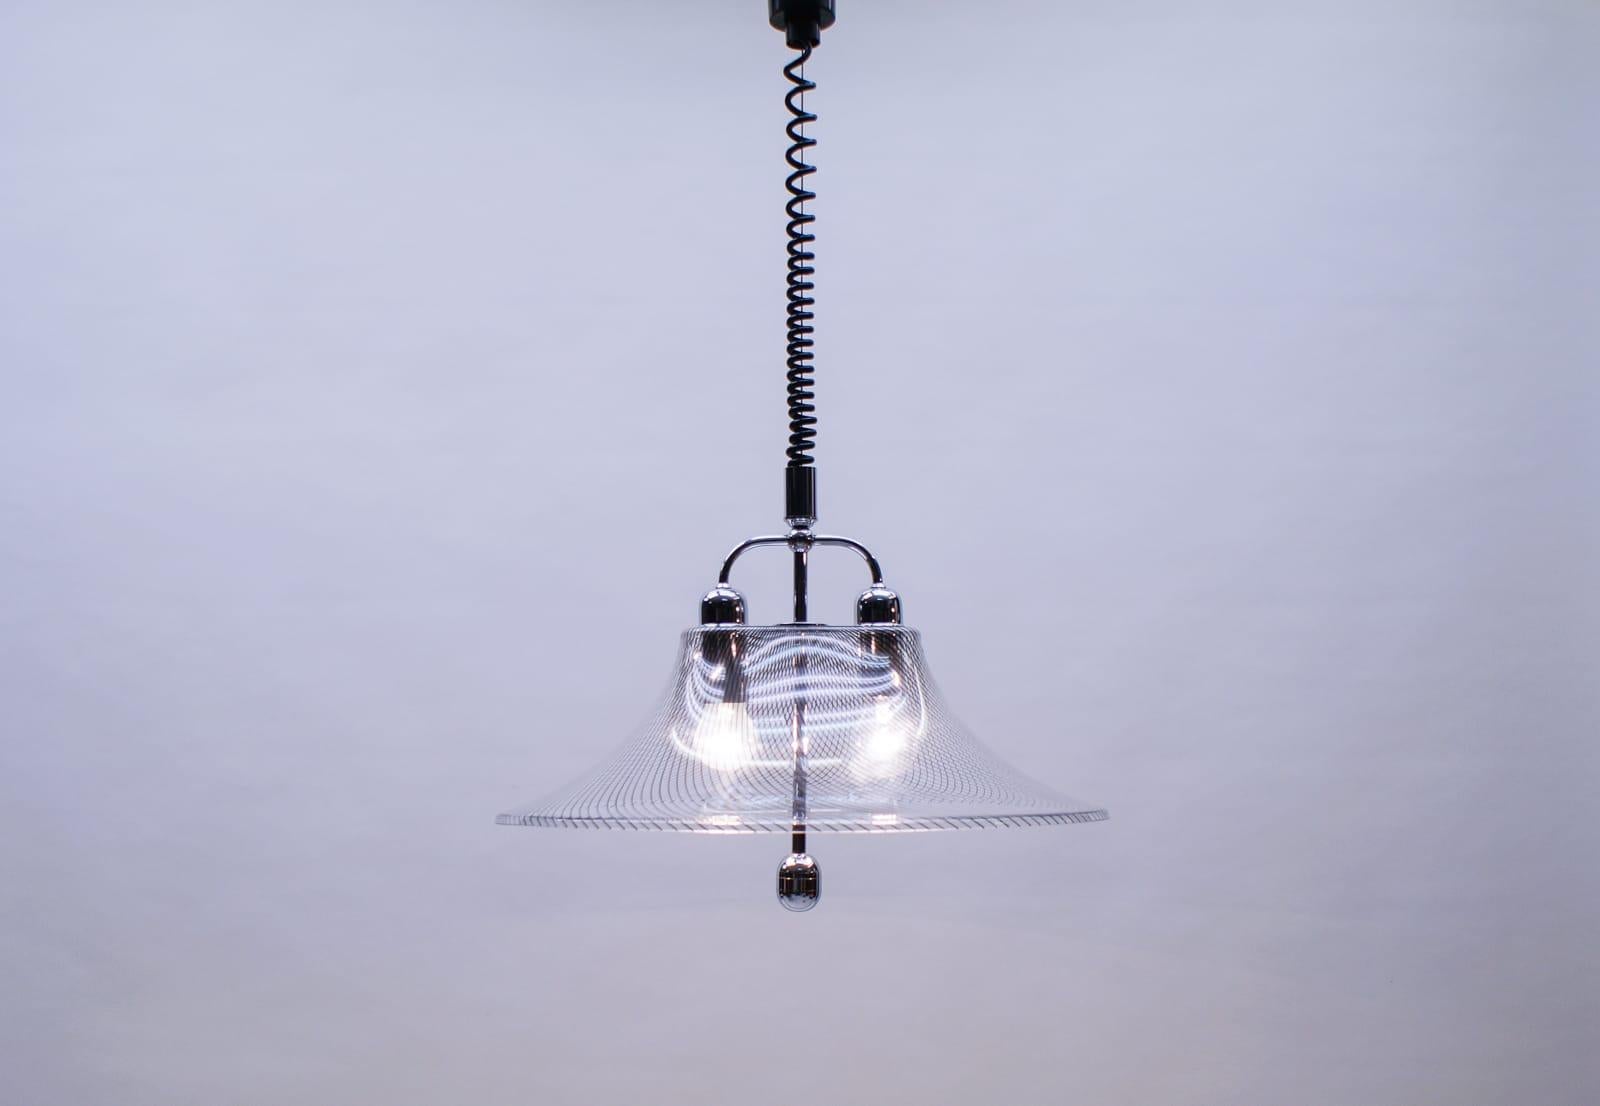 Very elegant striped acrylic hanging lamp by Edel-Acryl, 1970s

Height adjustable 70-158cm.

Executed in massive chrome-plated steel, the lamp comes with 2 x E27 / E26 Edison screw fit bulb sockets, is wired, in working condition and runs both